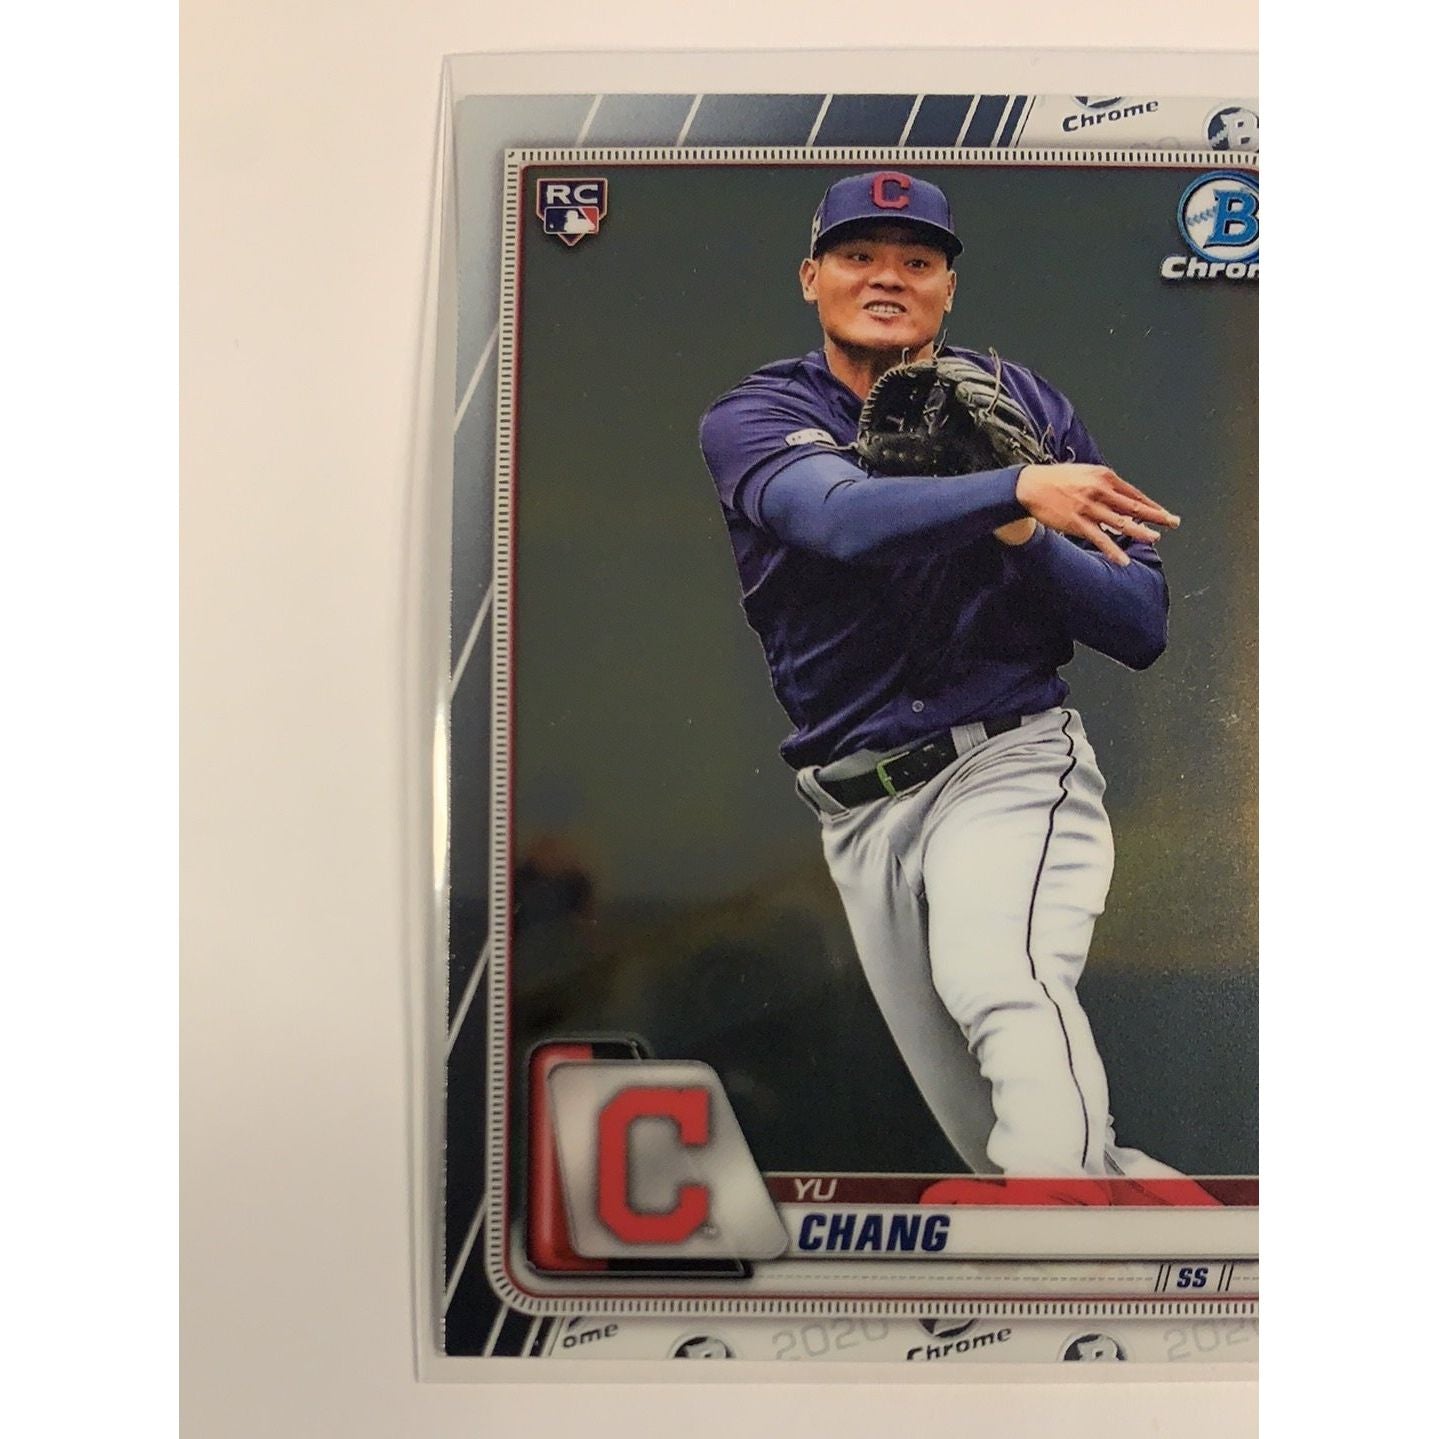  2020 Bowman Chrome Yu Chang RC  Local Legends Cards & Collectibles